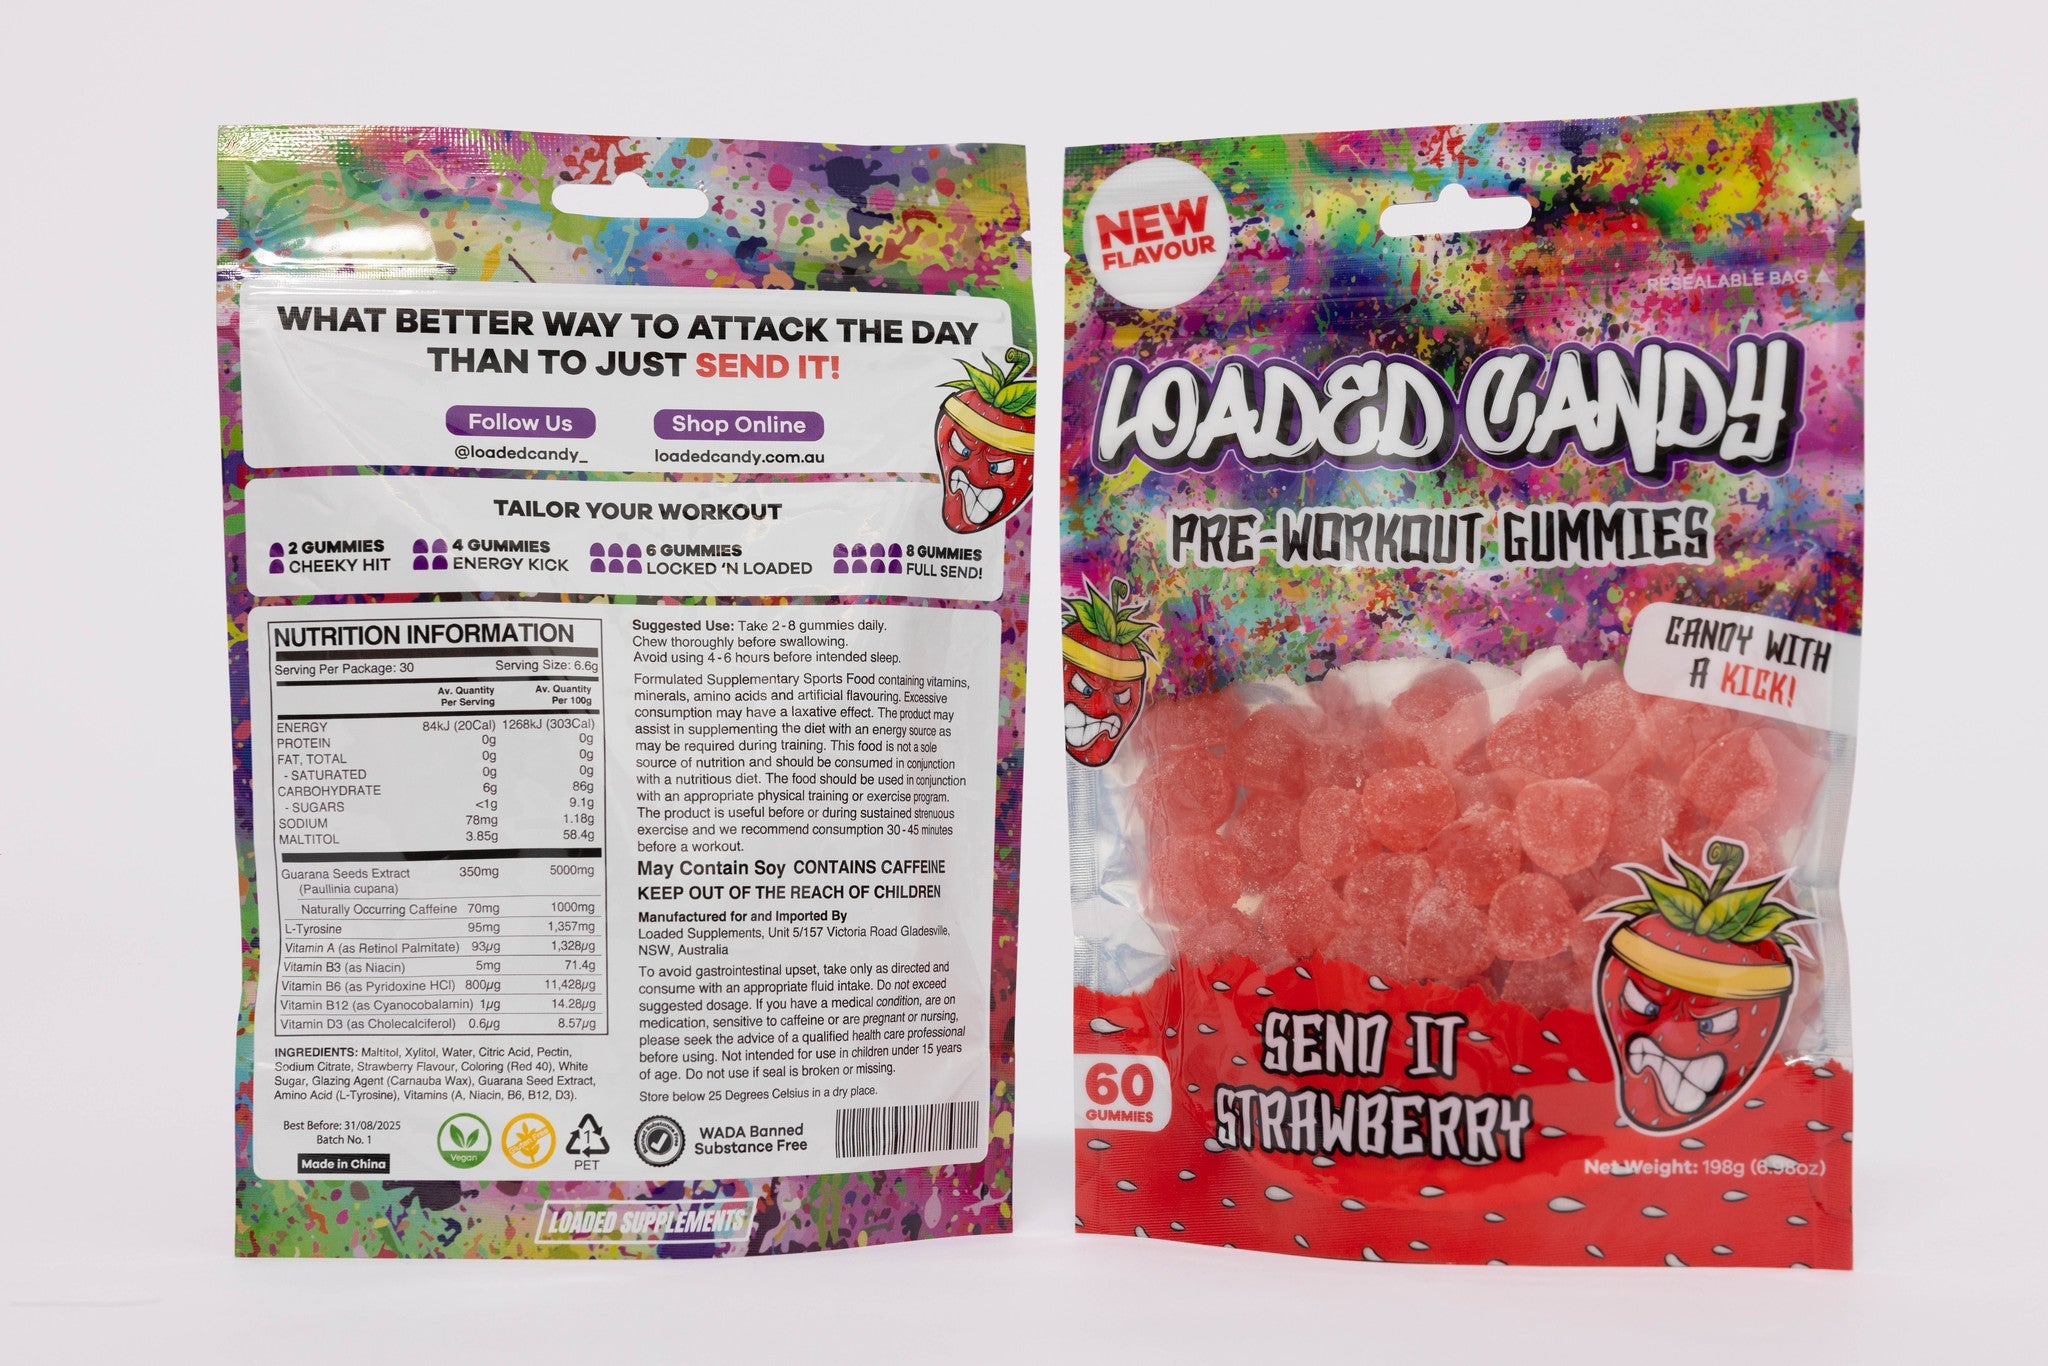 Send It Strawberry & Wicked Watermelon Pre-Workout Gummy (DUO PACK)